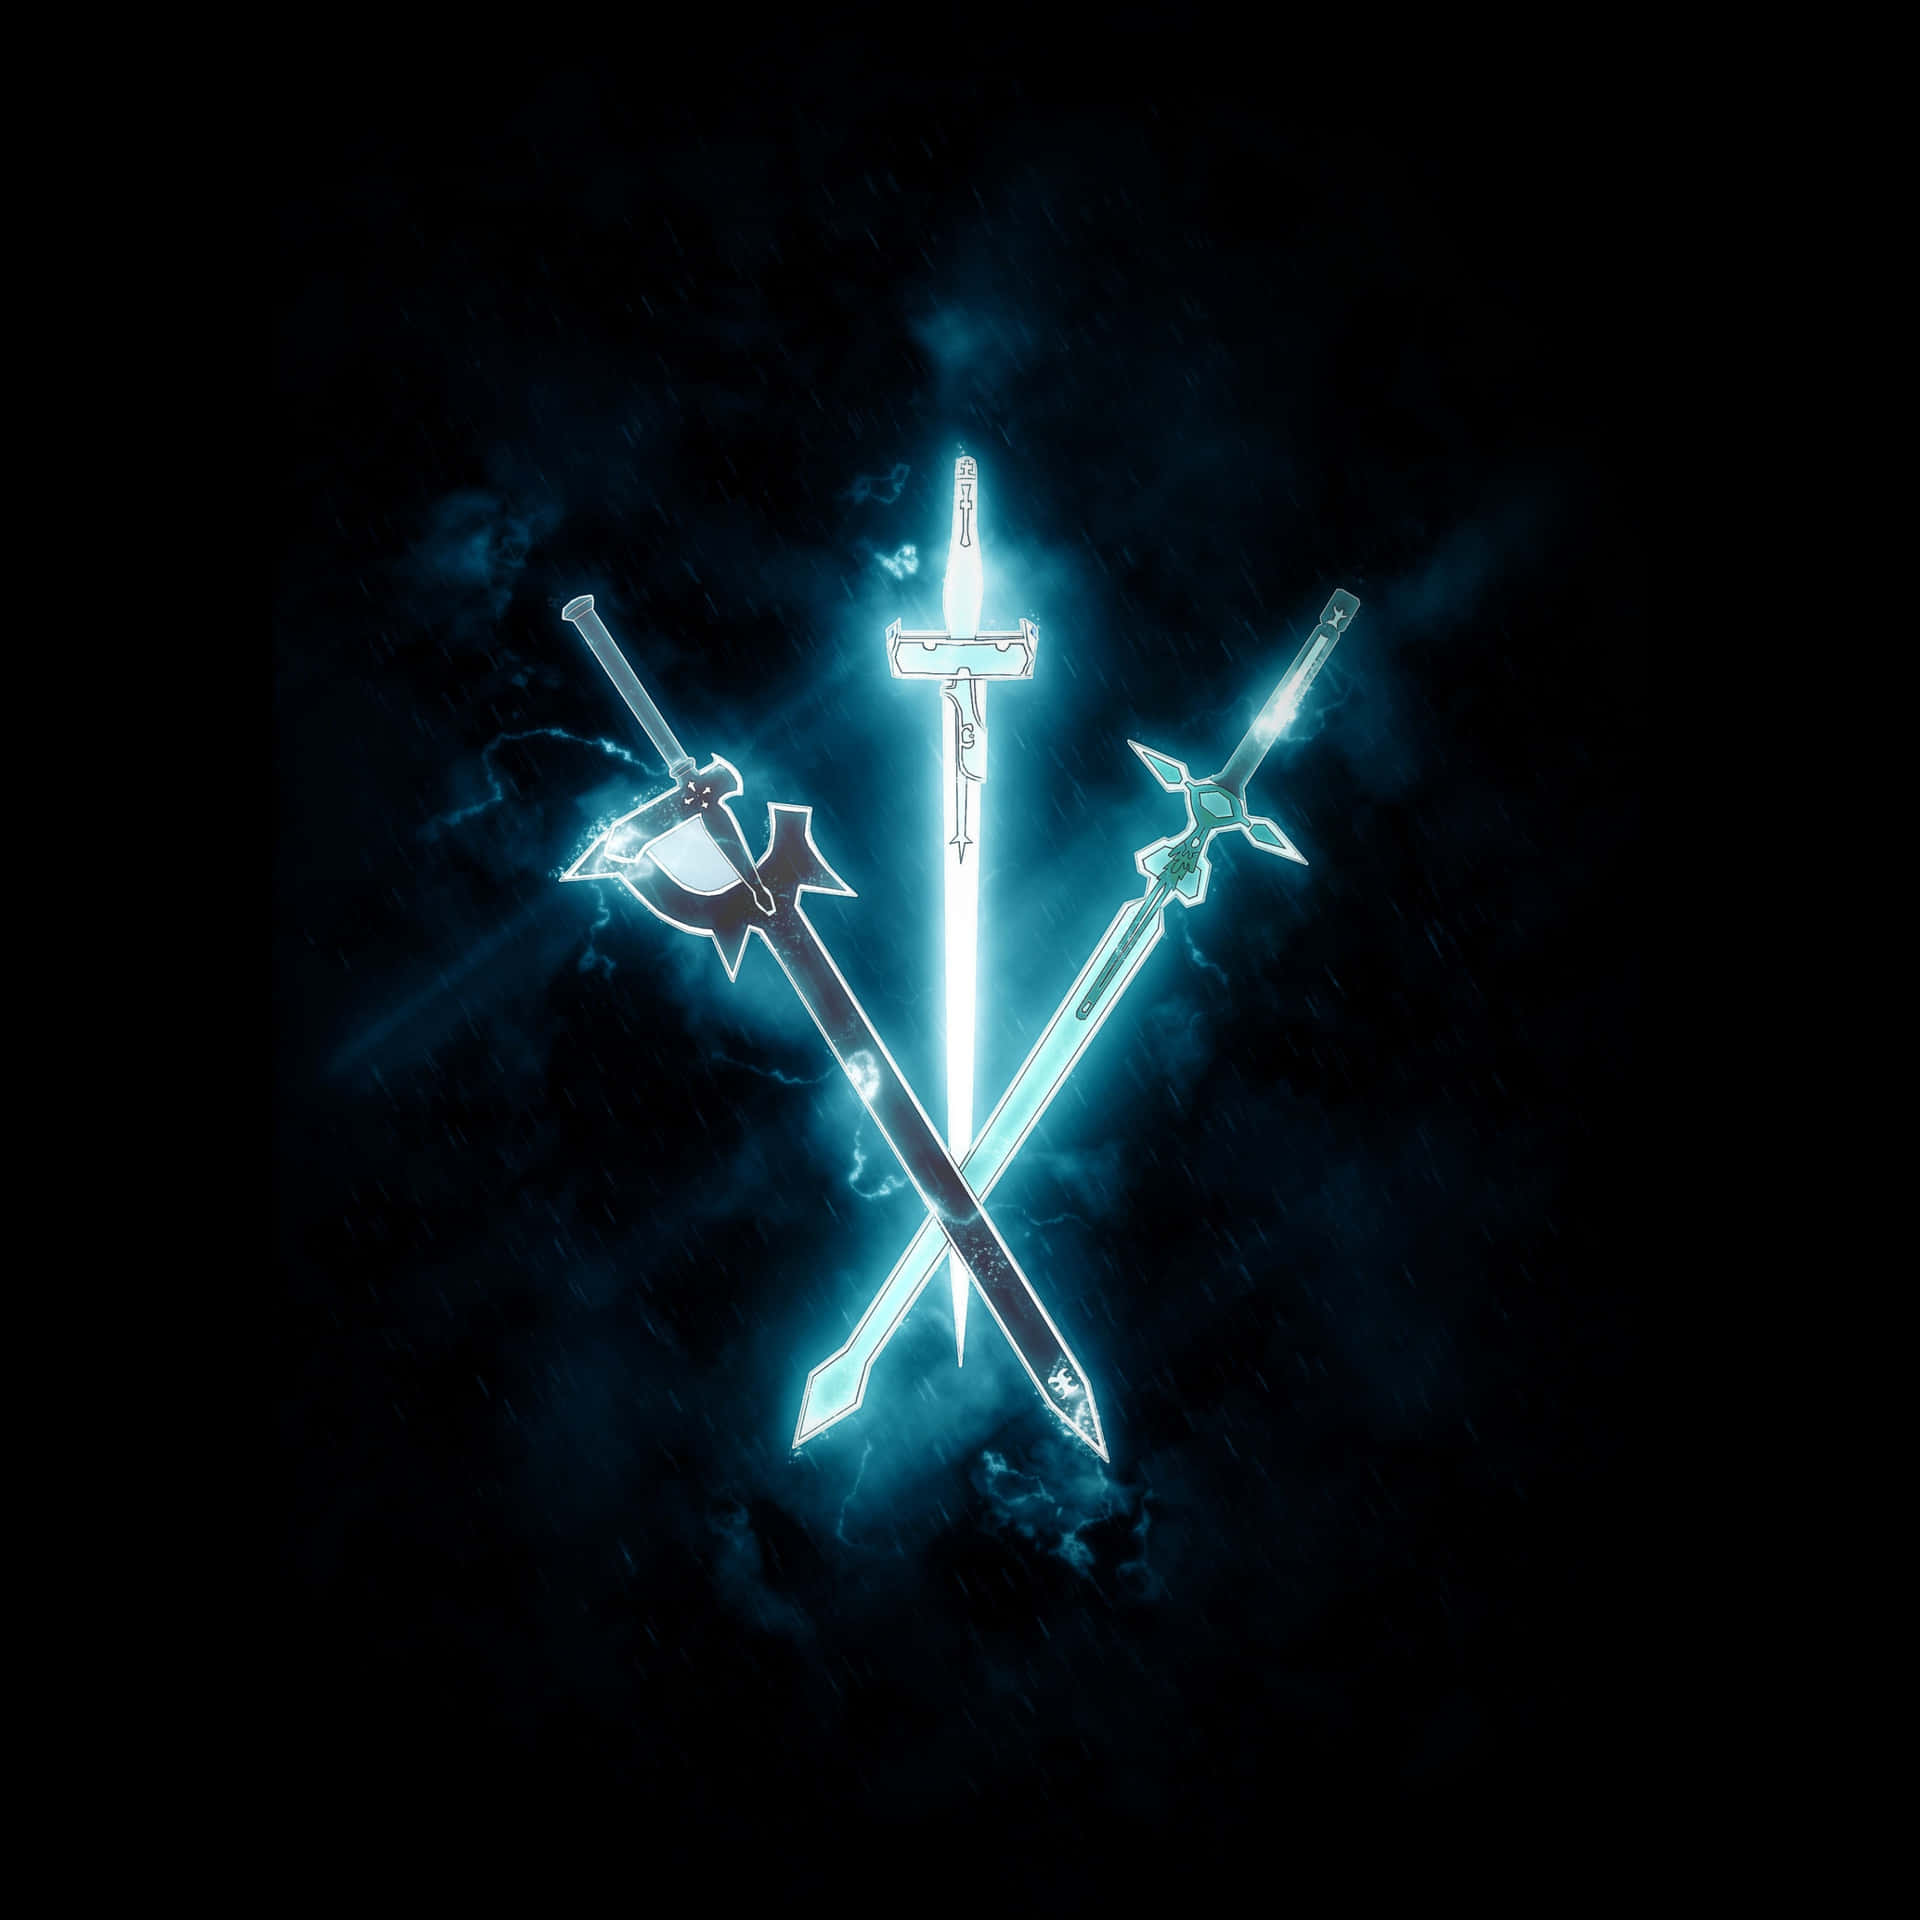 a sword and two swords on a dark background